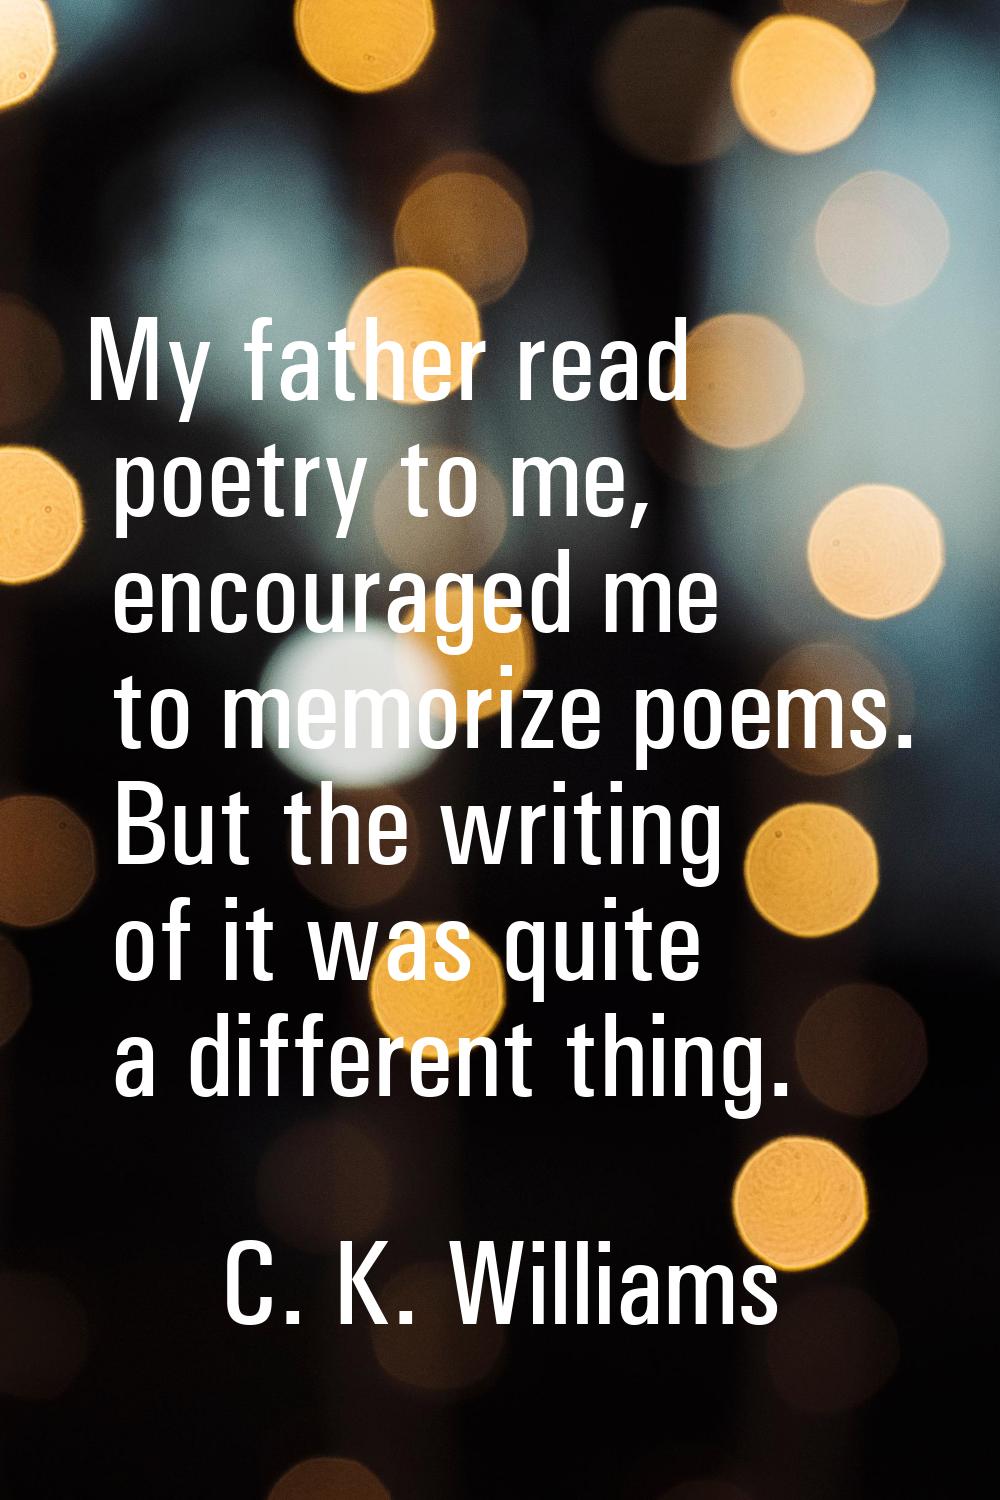 My father read poetry to me, encouraged me to memorize poems. But the writing of it was quite a dif